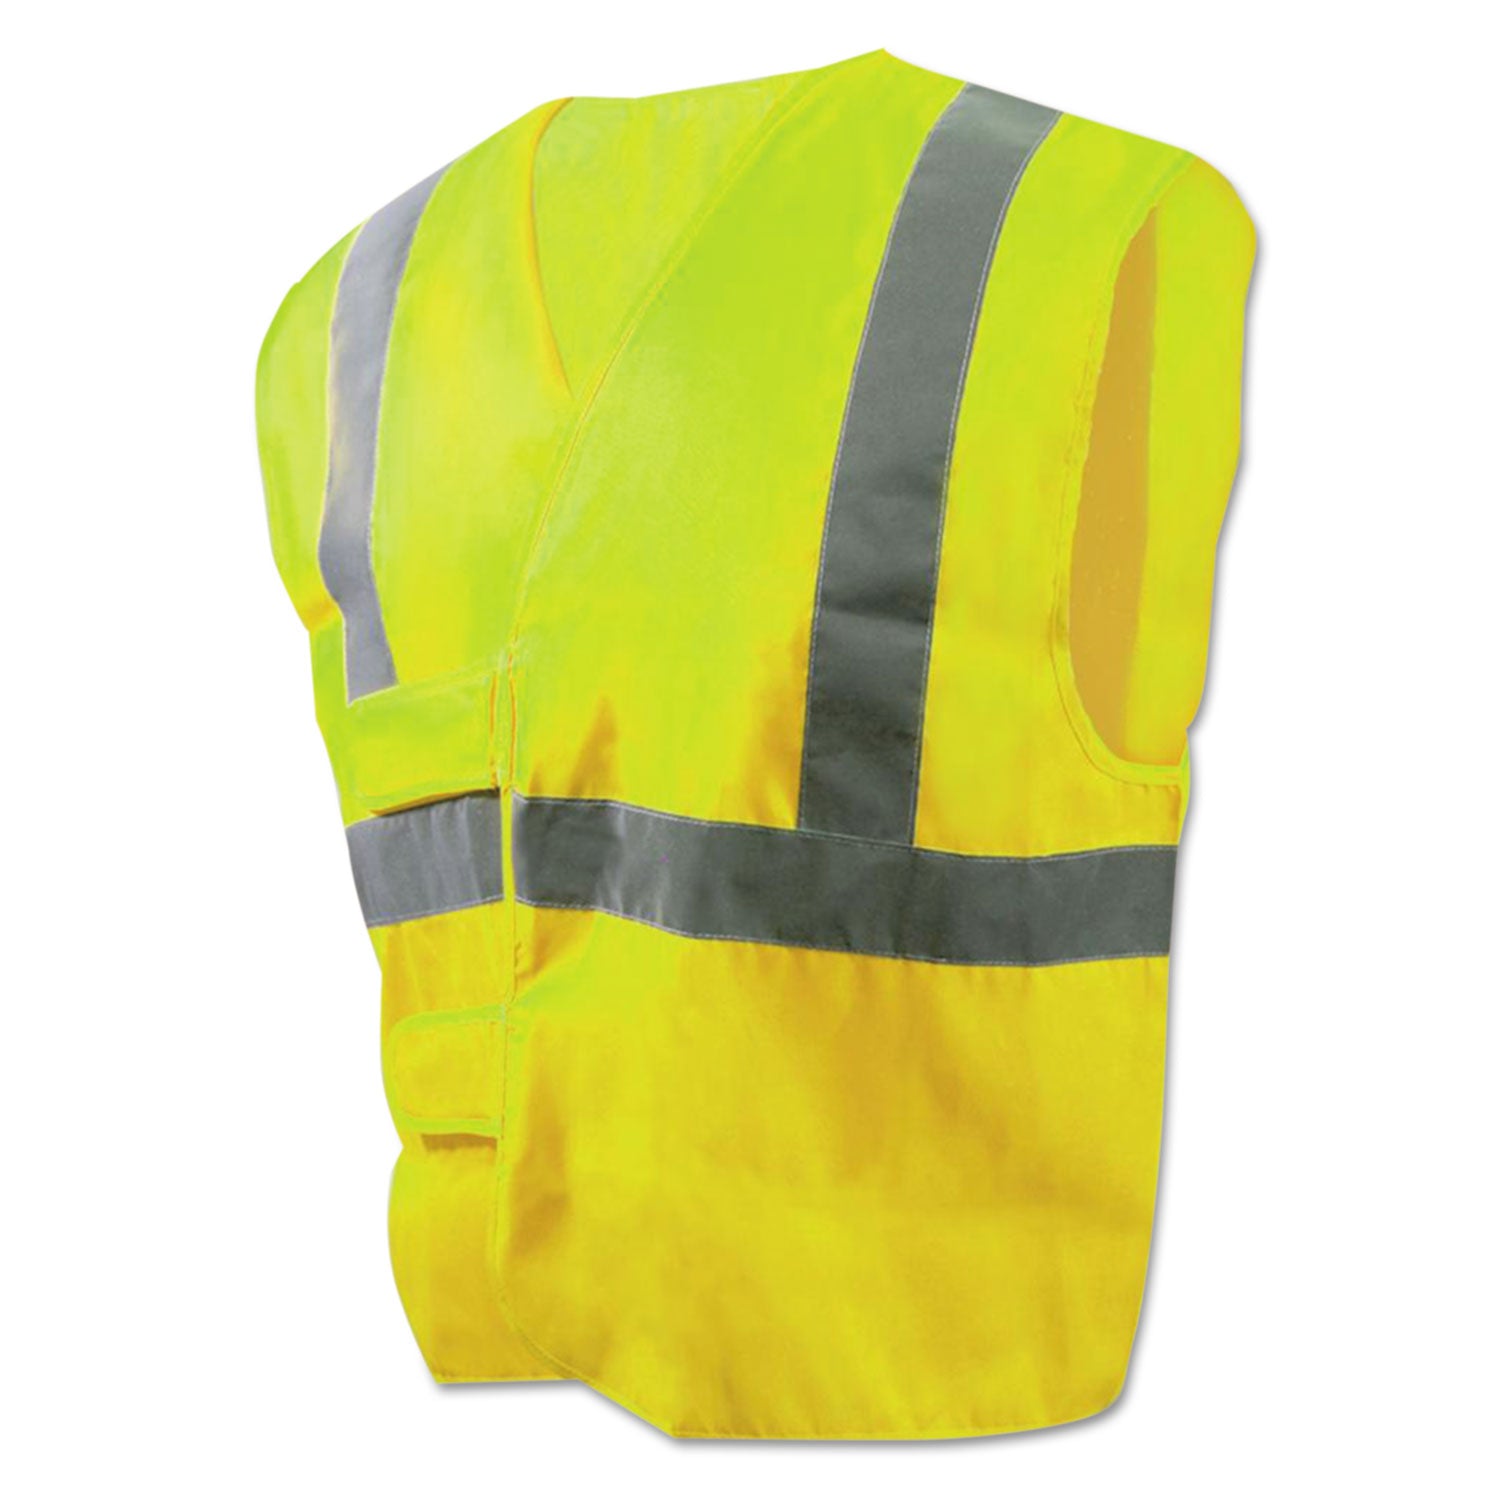 class-2-safety-vests-standard-lime-green-silver_bwk00036 - 1